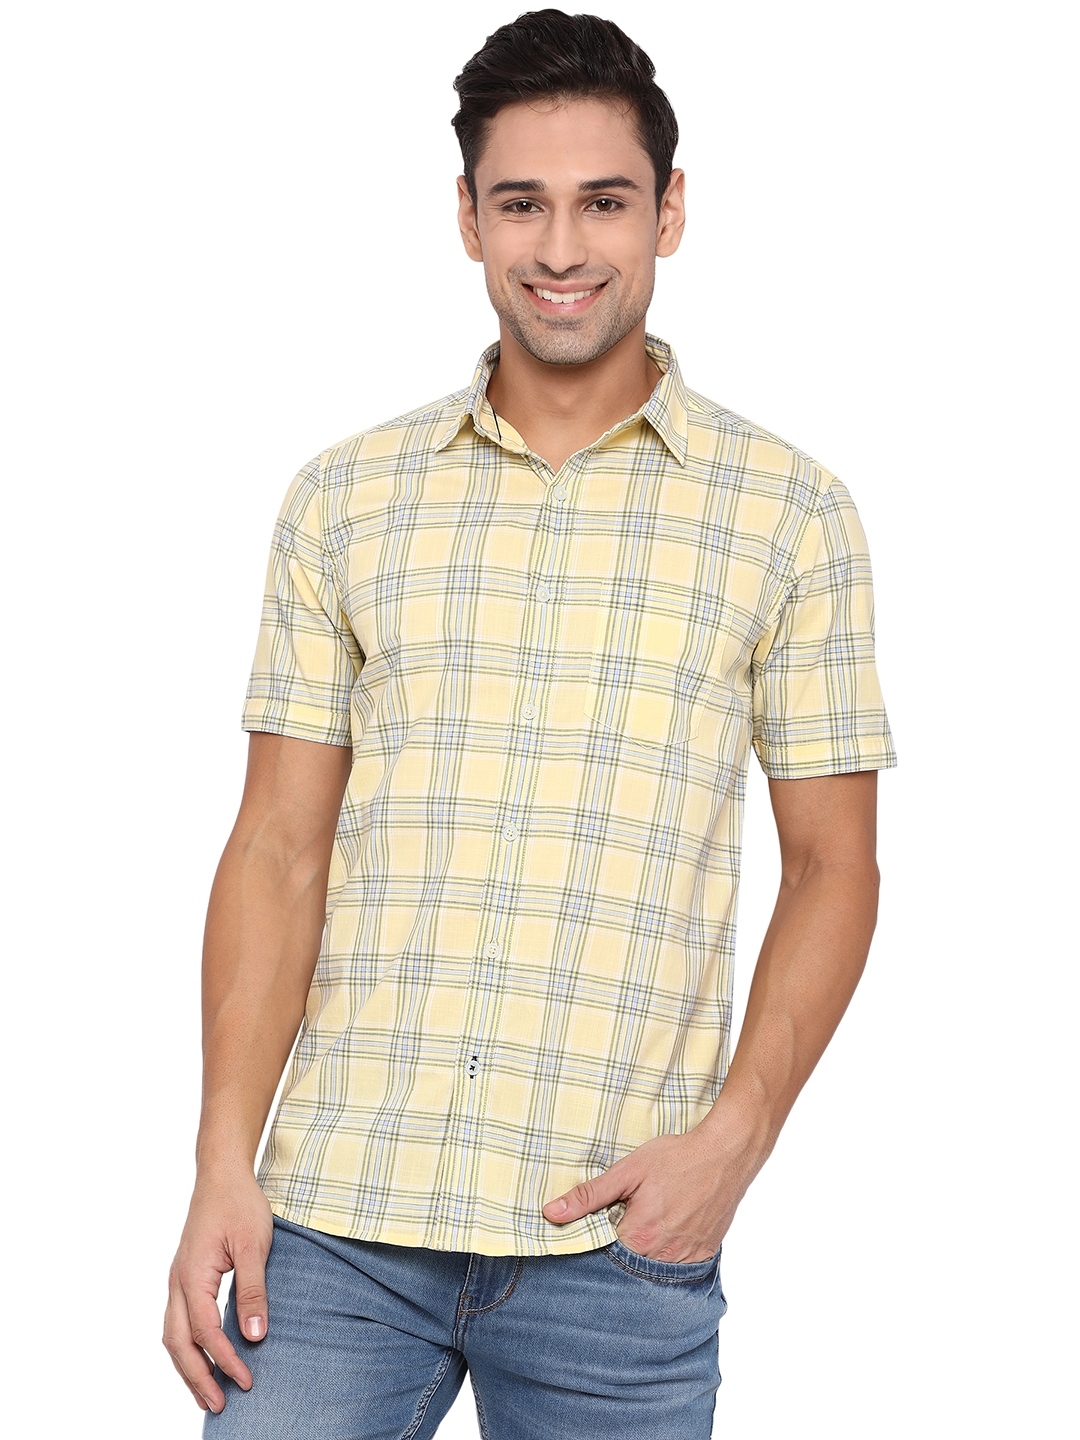 JadeBlue Sport | Mellow Yellow Checked Casual Shirts (JBS-CH-906A MELLOW YELLOW)